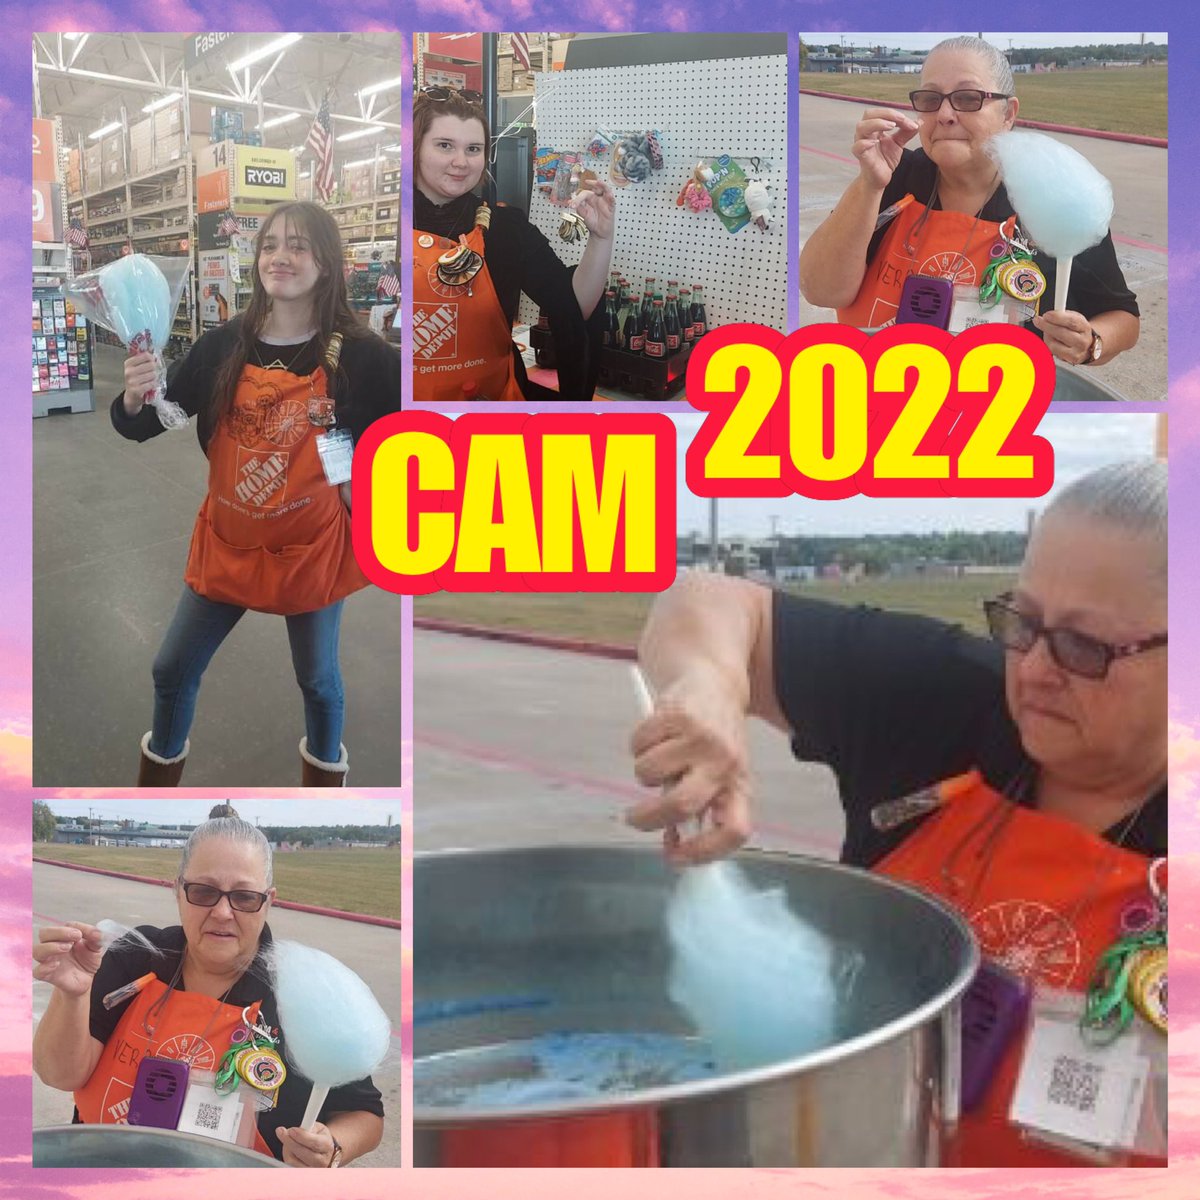 🍭🍬🍭Ending the CAM celebration week with cotton candy for all!! Yum!🍭🍬🍭 #CAM2022